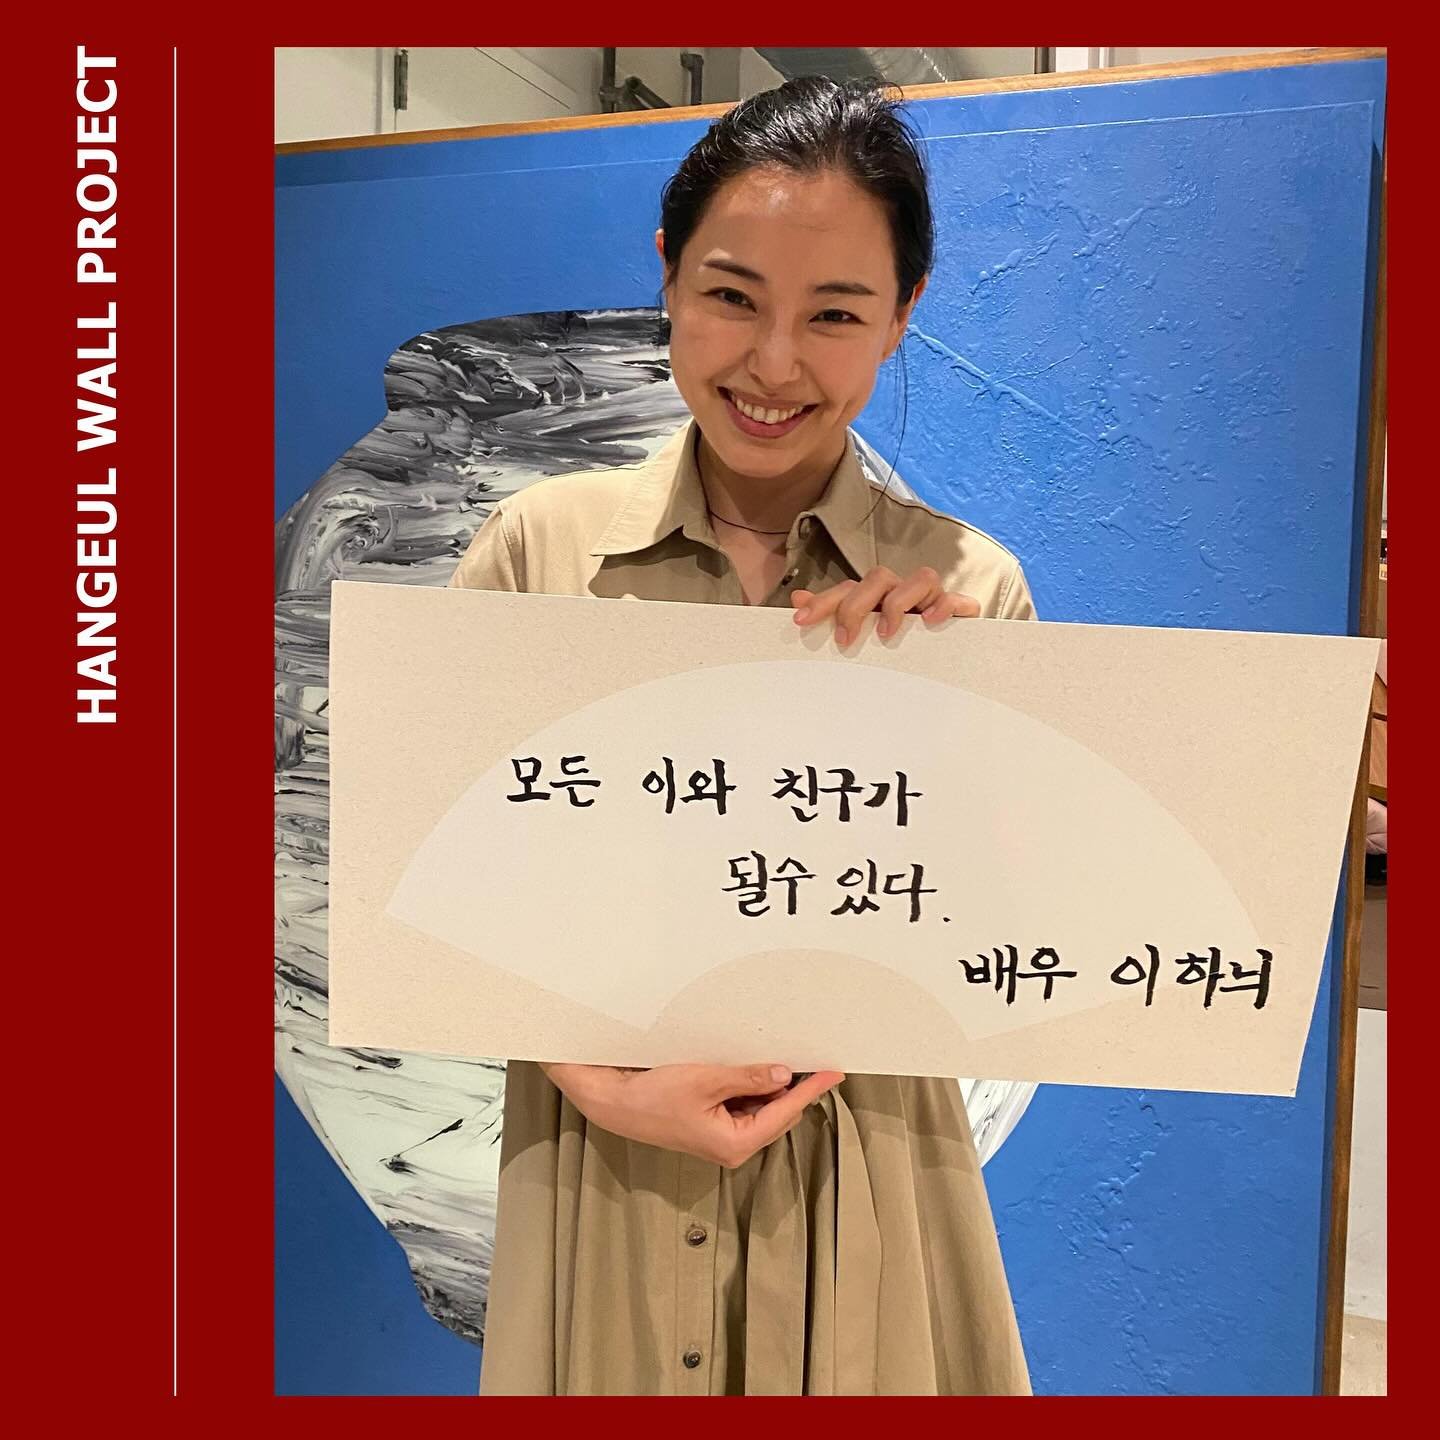 Hanee Lee(@honey_lee32), the celebrated actress, shares her genuine insights on life 🙏🏼

&ldquo;모든 이와 친구가 될 수 있다&rdquo;
&ldquo;You can become friends with anyone.&rdquo;

&ldquo;조급함이 다 망친다. 천천히 숨 다시 쉬고, 넌 할 수 있다&rdquo;
&ldquo;Impatience can ruin ev